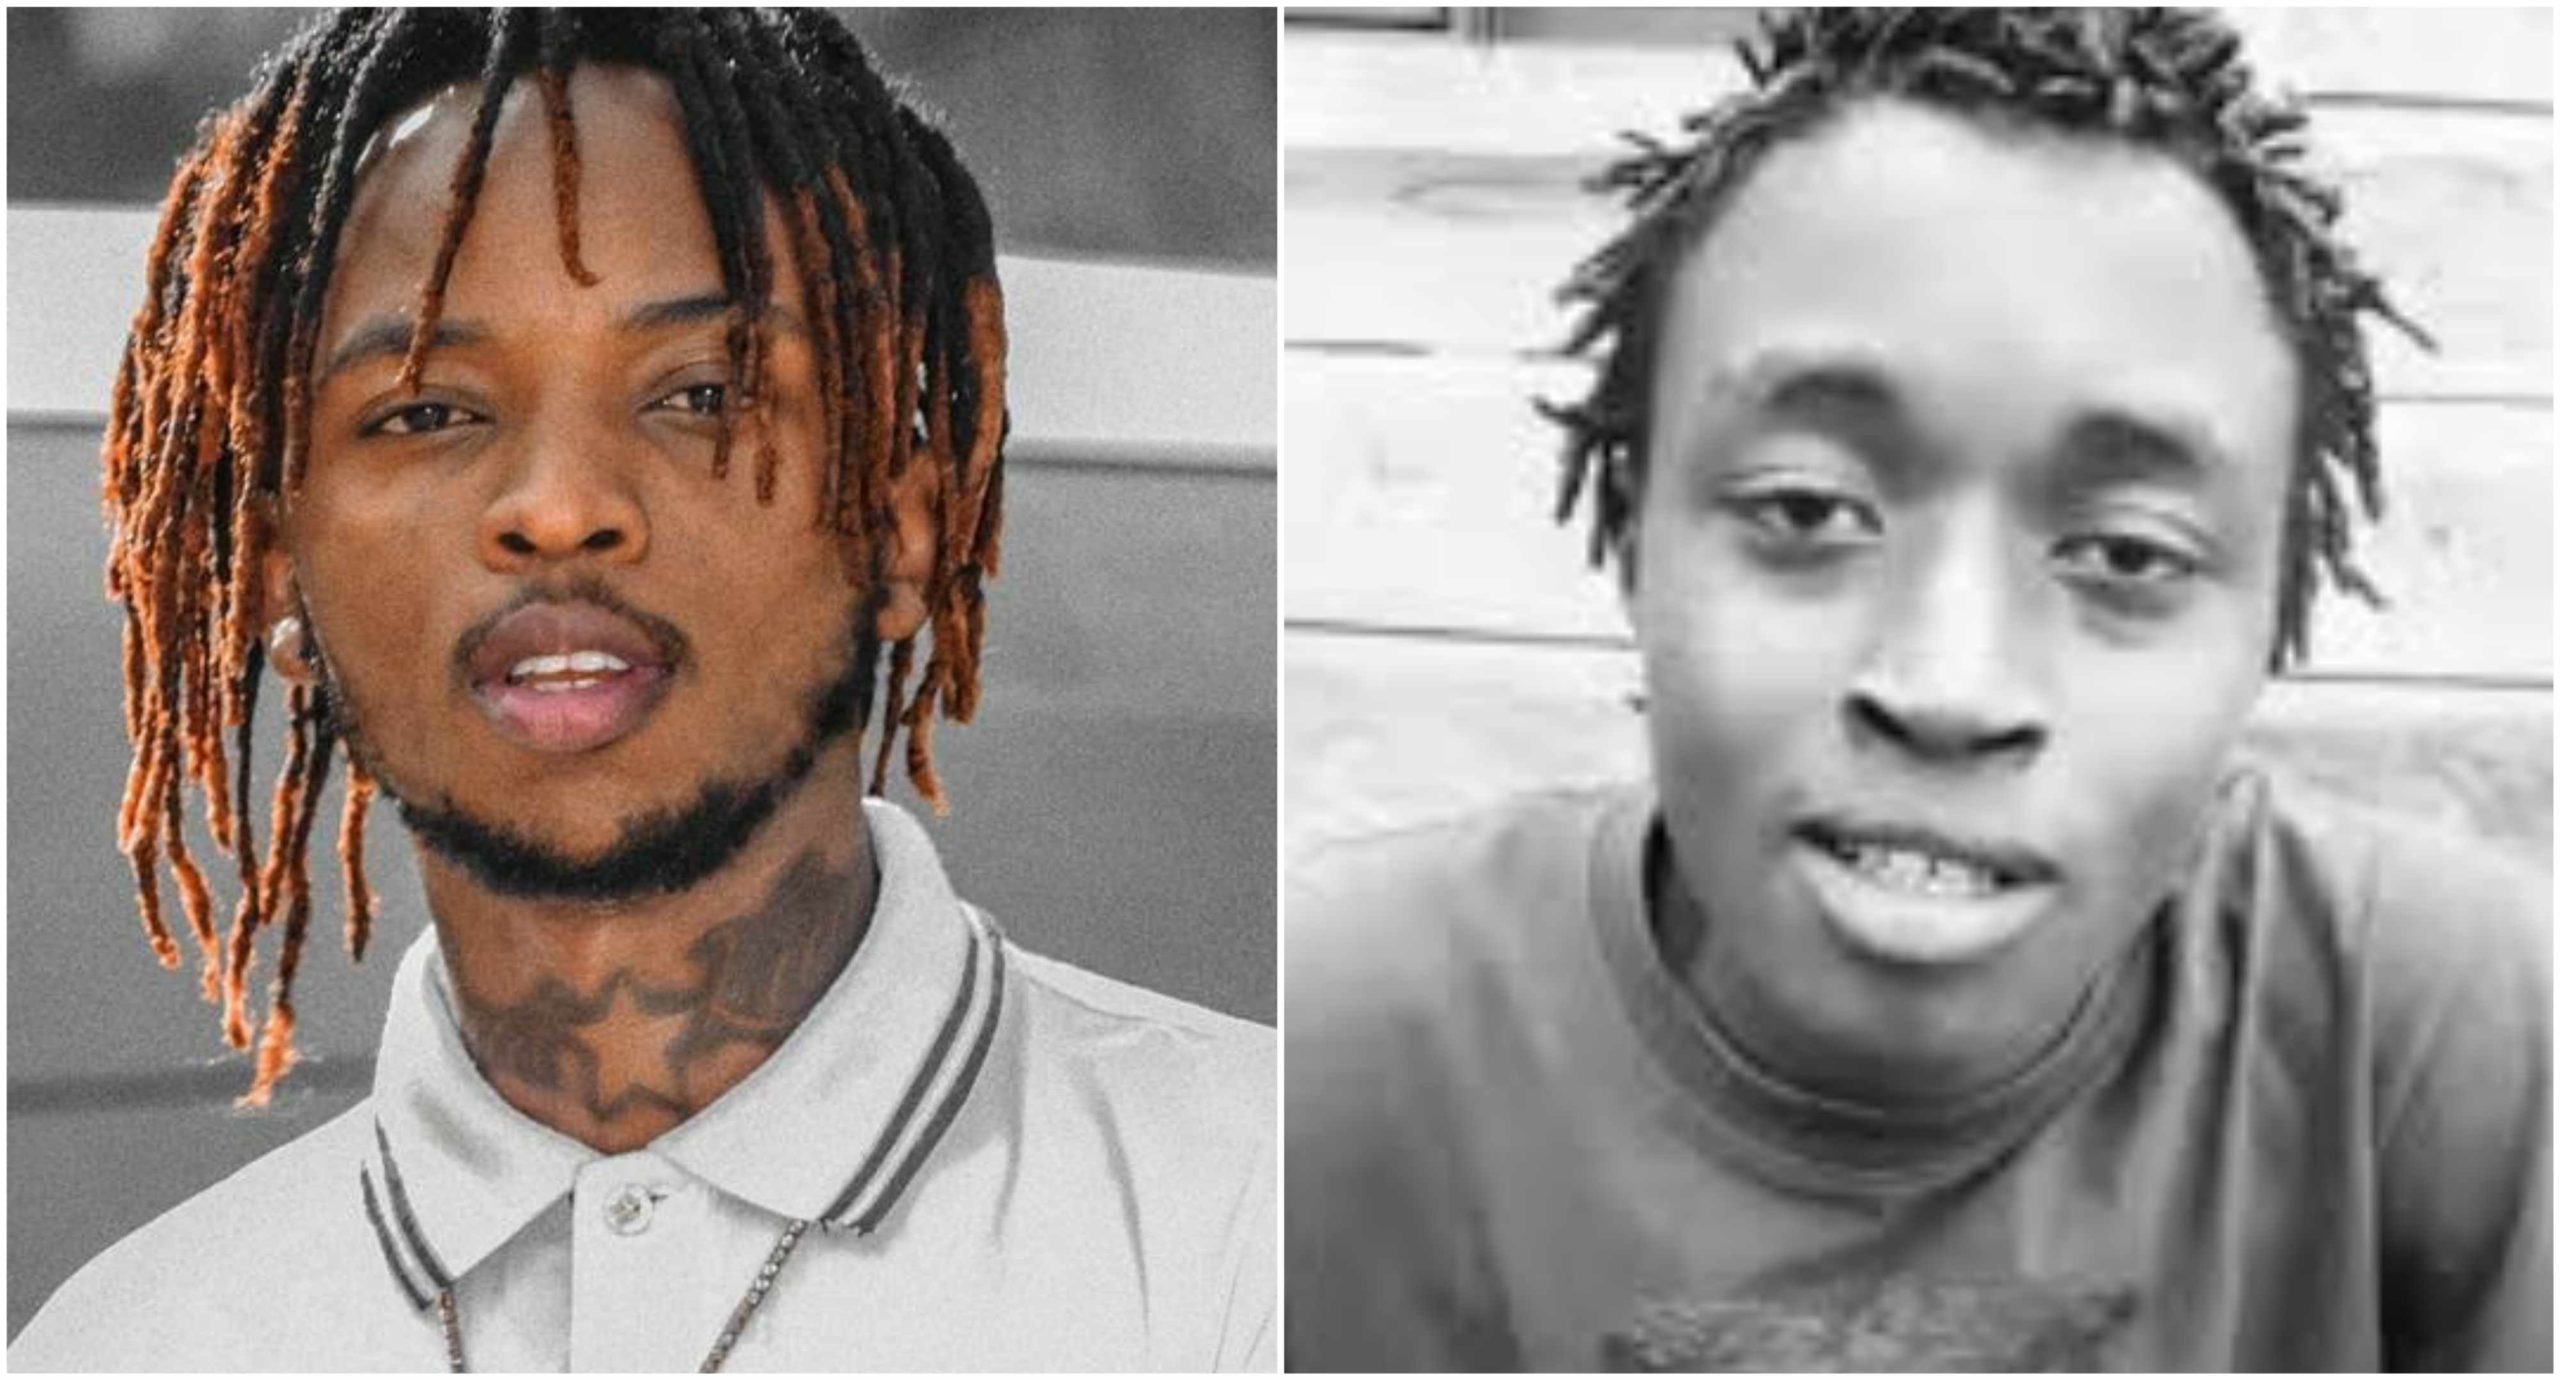 EXCLUSIVE: Magix Enga finally reveals why he was forced to kick out Rudra Kartel